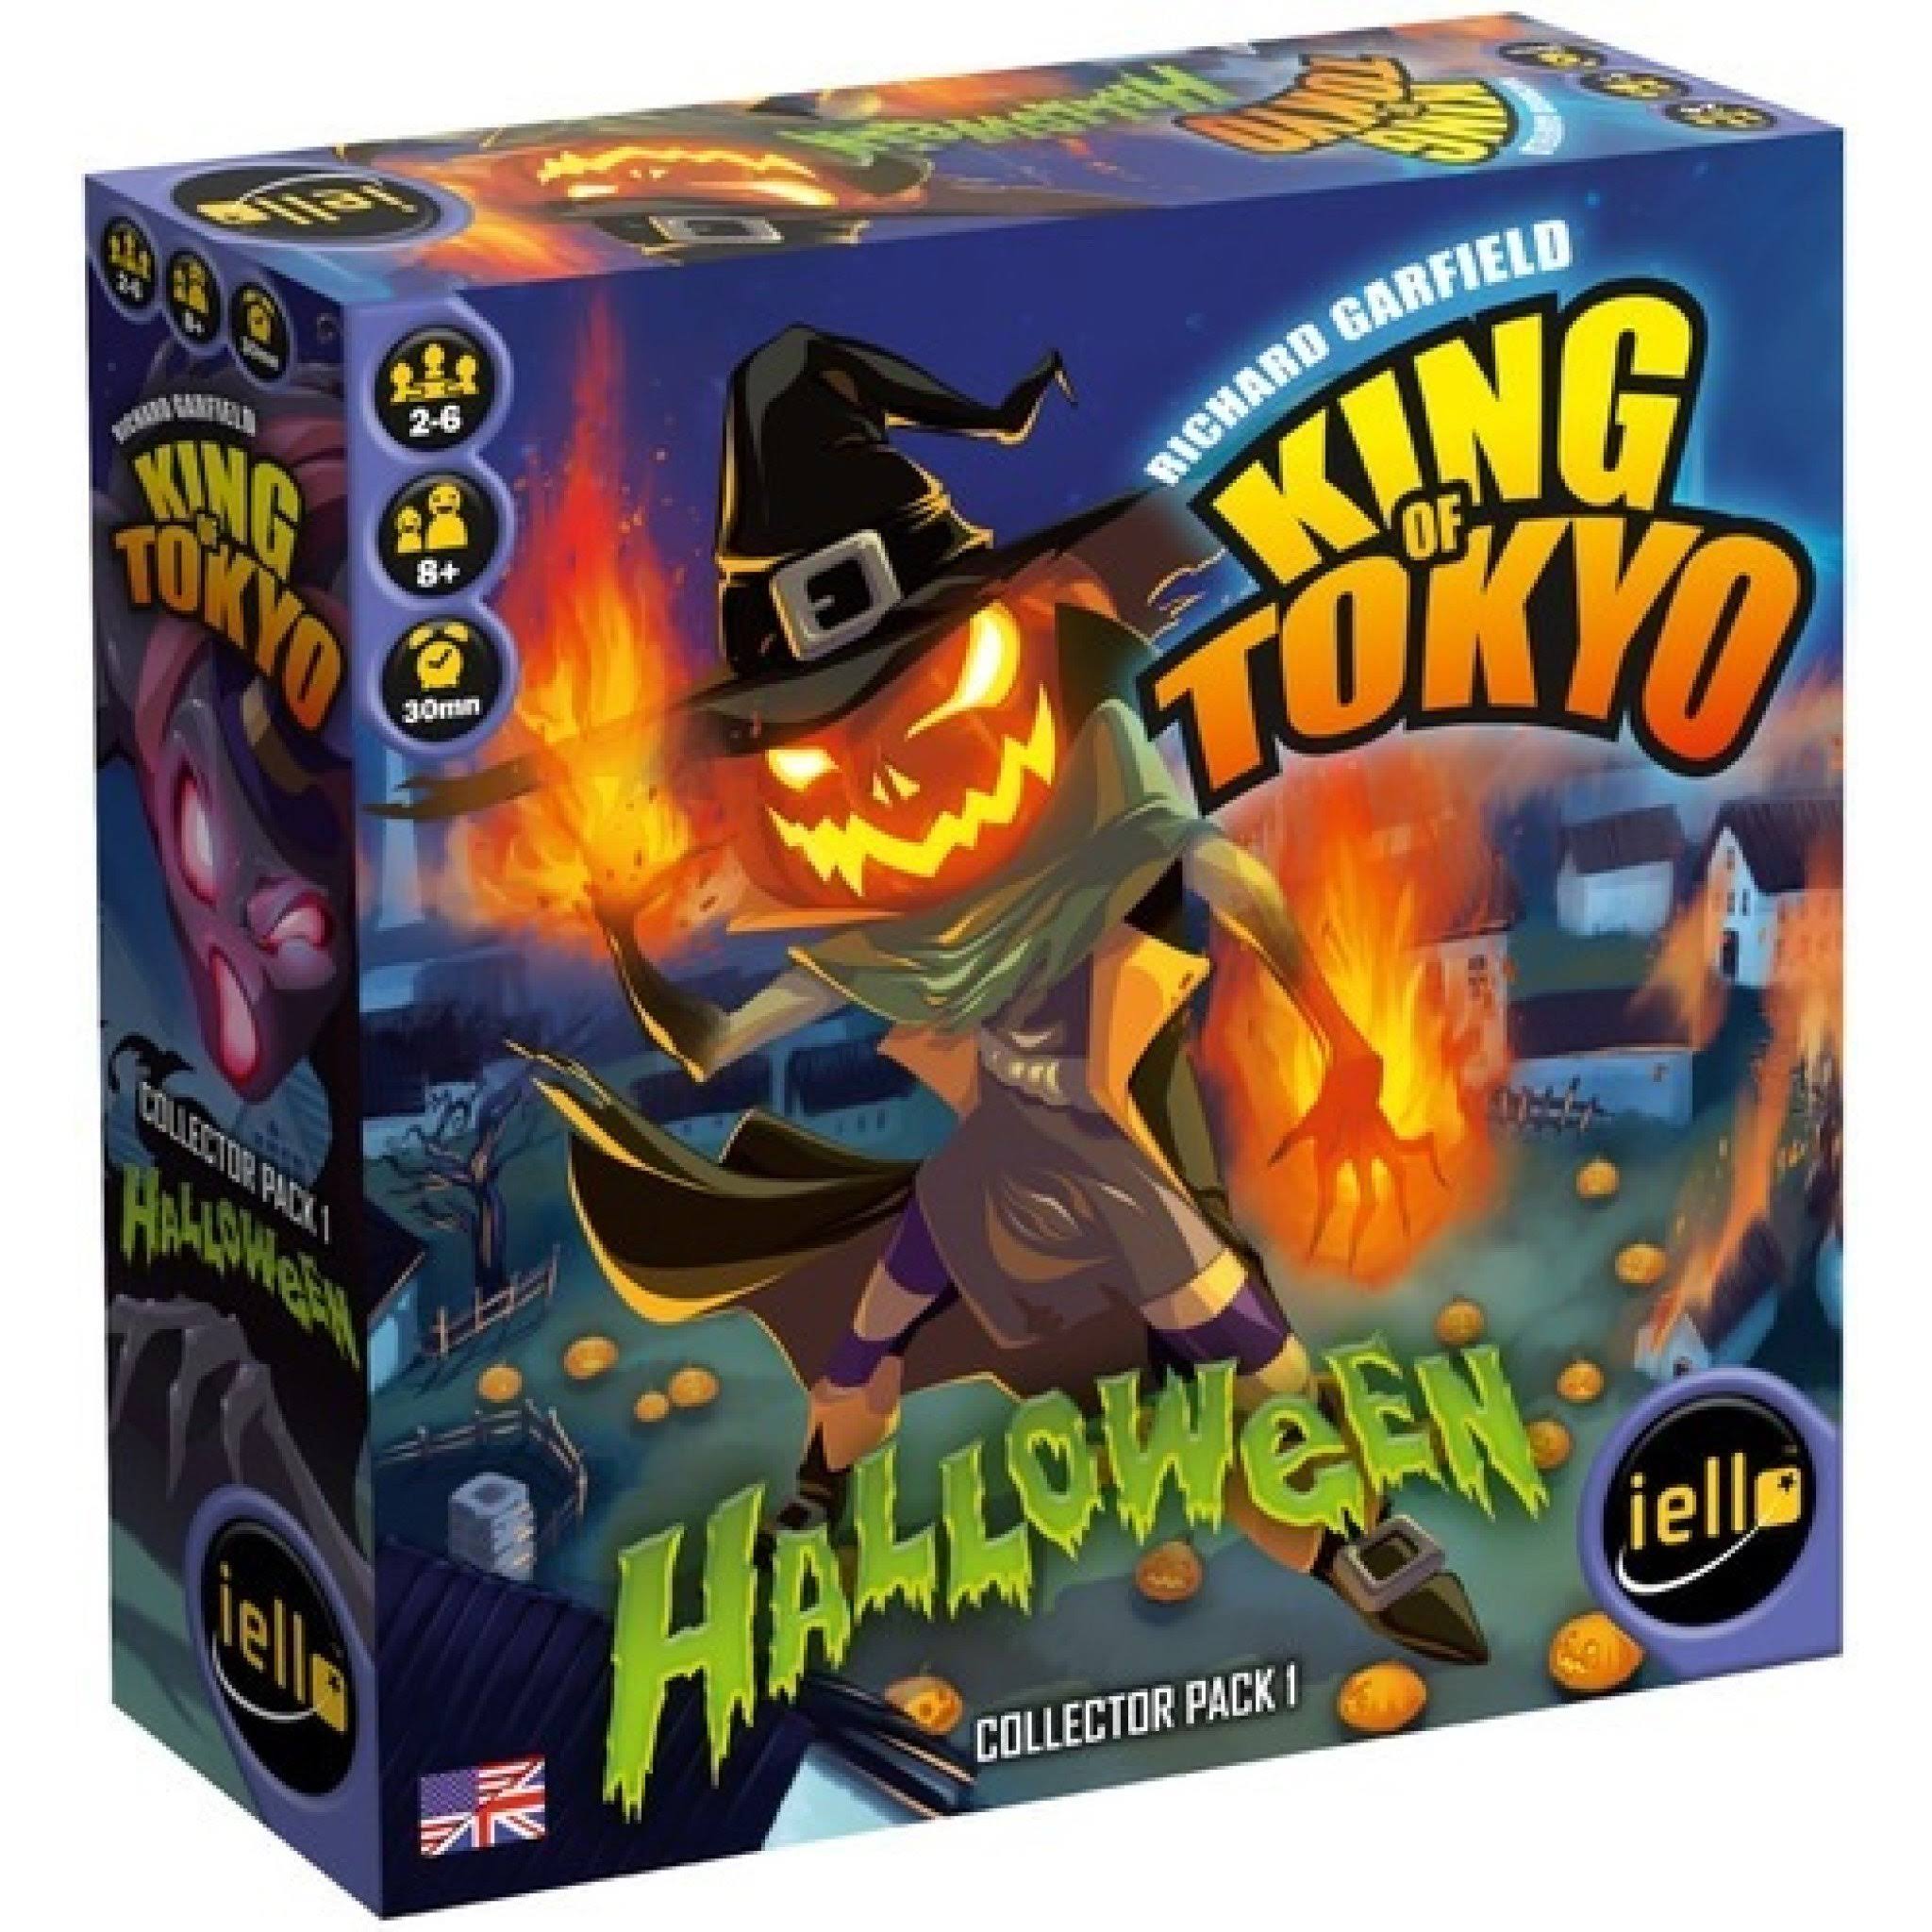 King of Tokyo Halloween Expansion Board Game